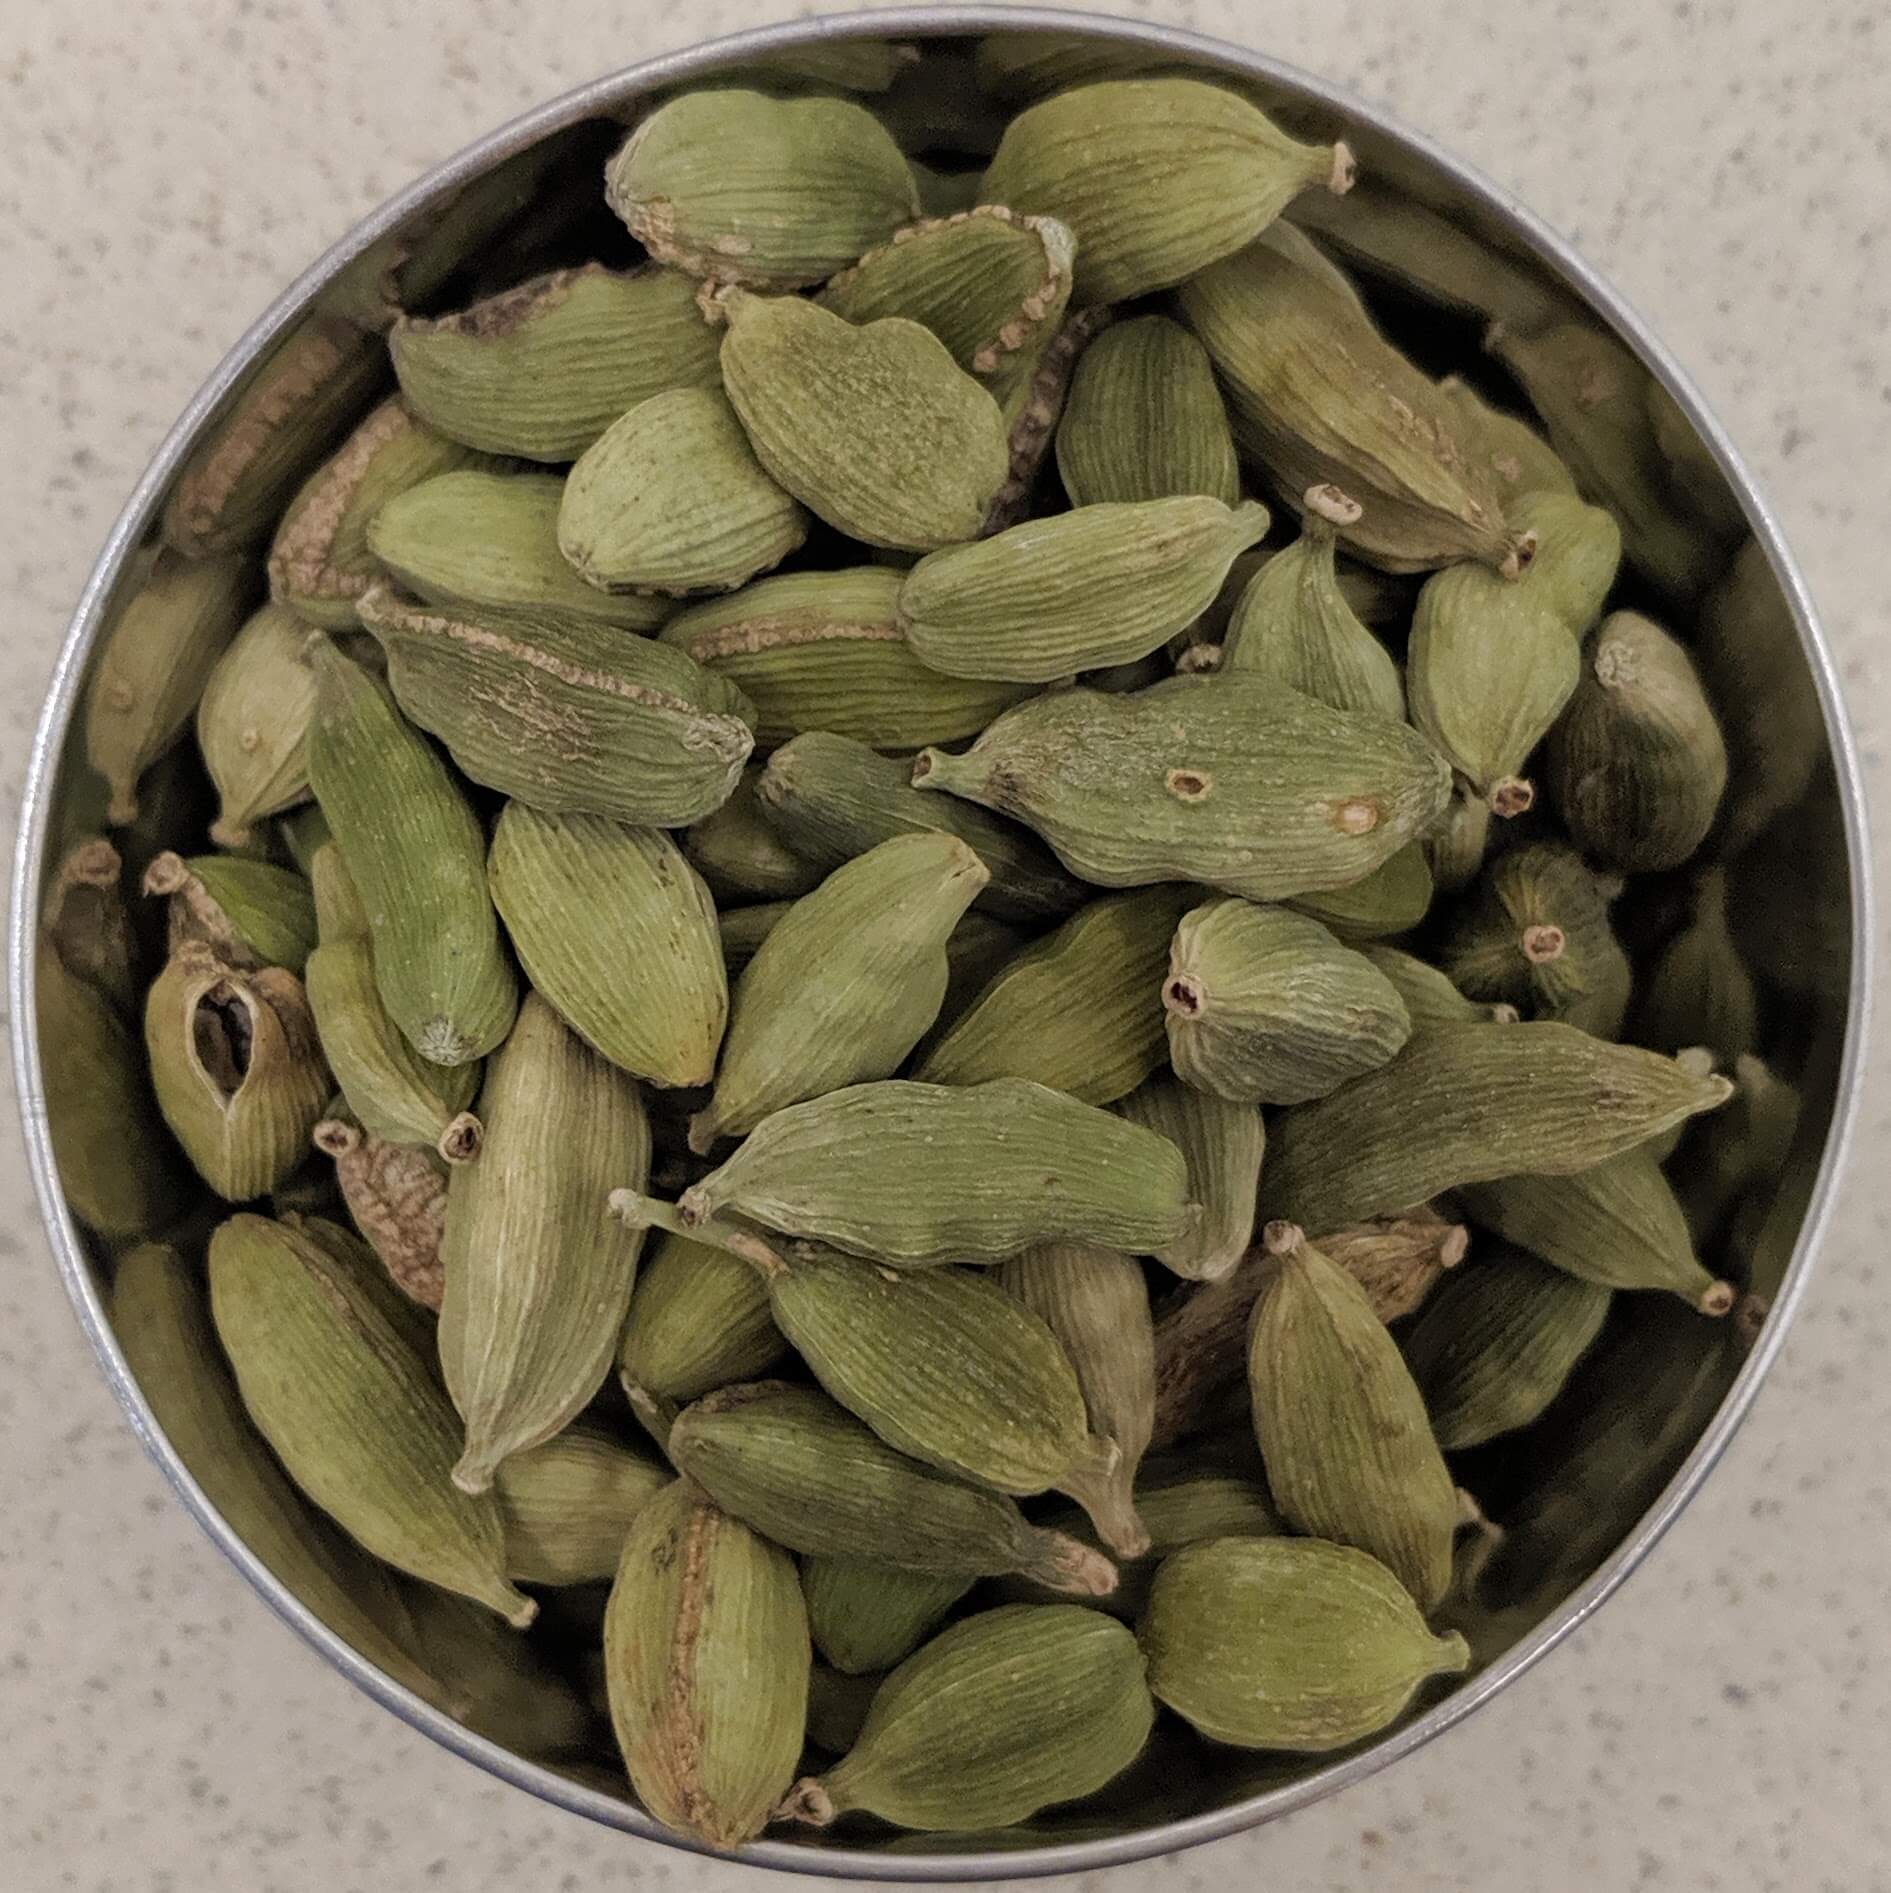 Albums 90+ Images pale green spice pod used in indian curries Updated